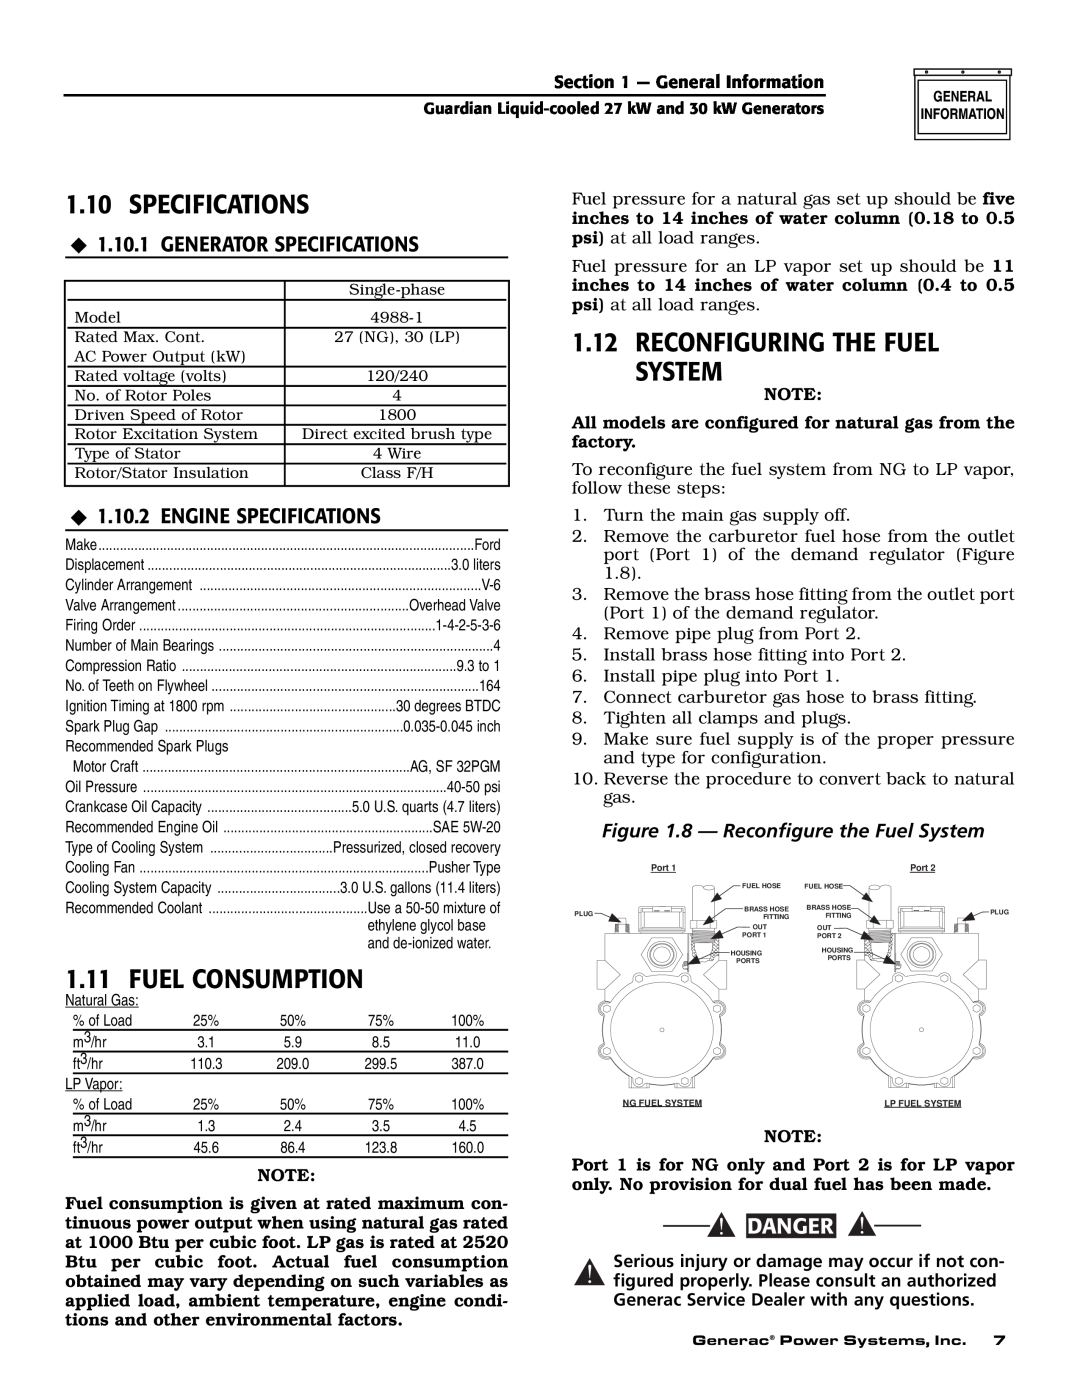 Generac Power Systems 004988-1 owner manual Specifications, Fuel Consumption, 1.12RECONFIGURING THE FUEL SYSTEM, Danger 